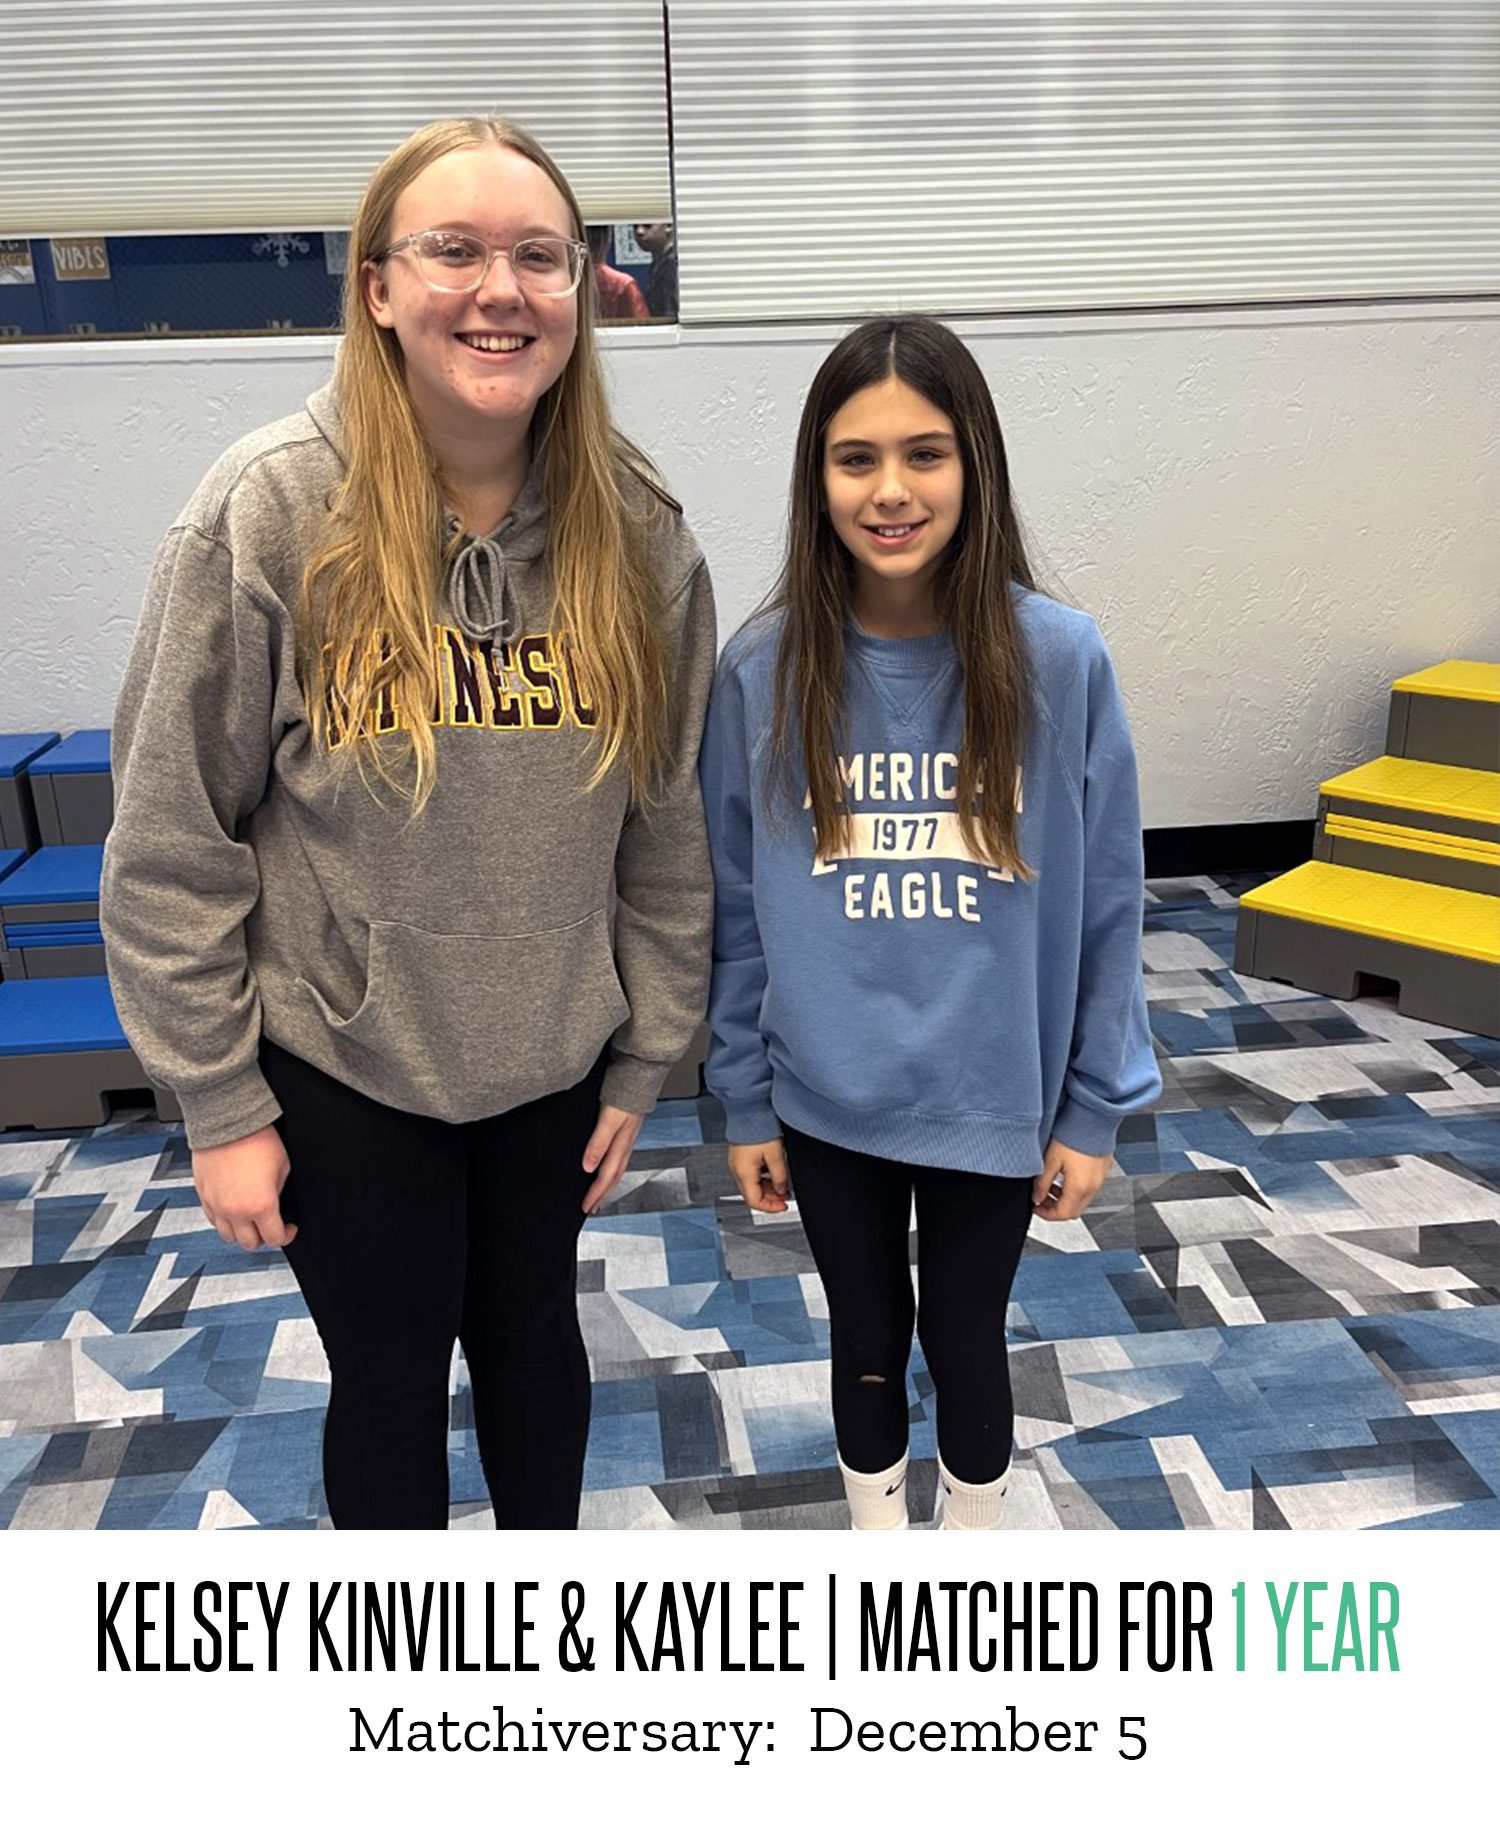 Kelsey Kinville and Kaylee pose for a picture after being matched for one year